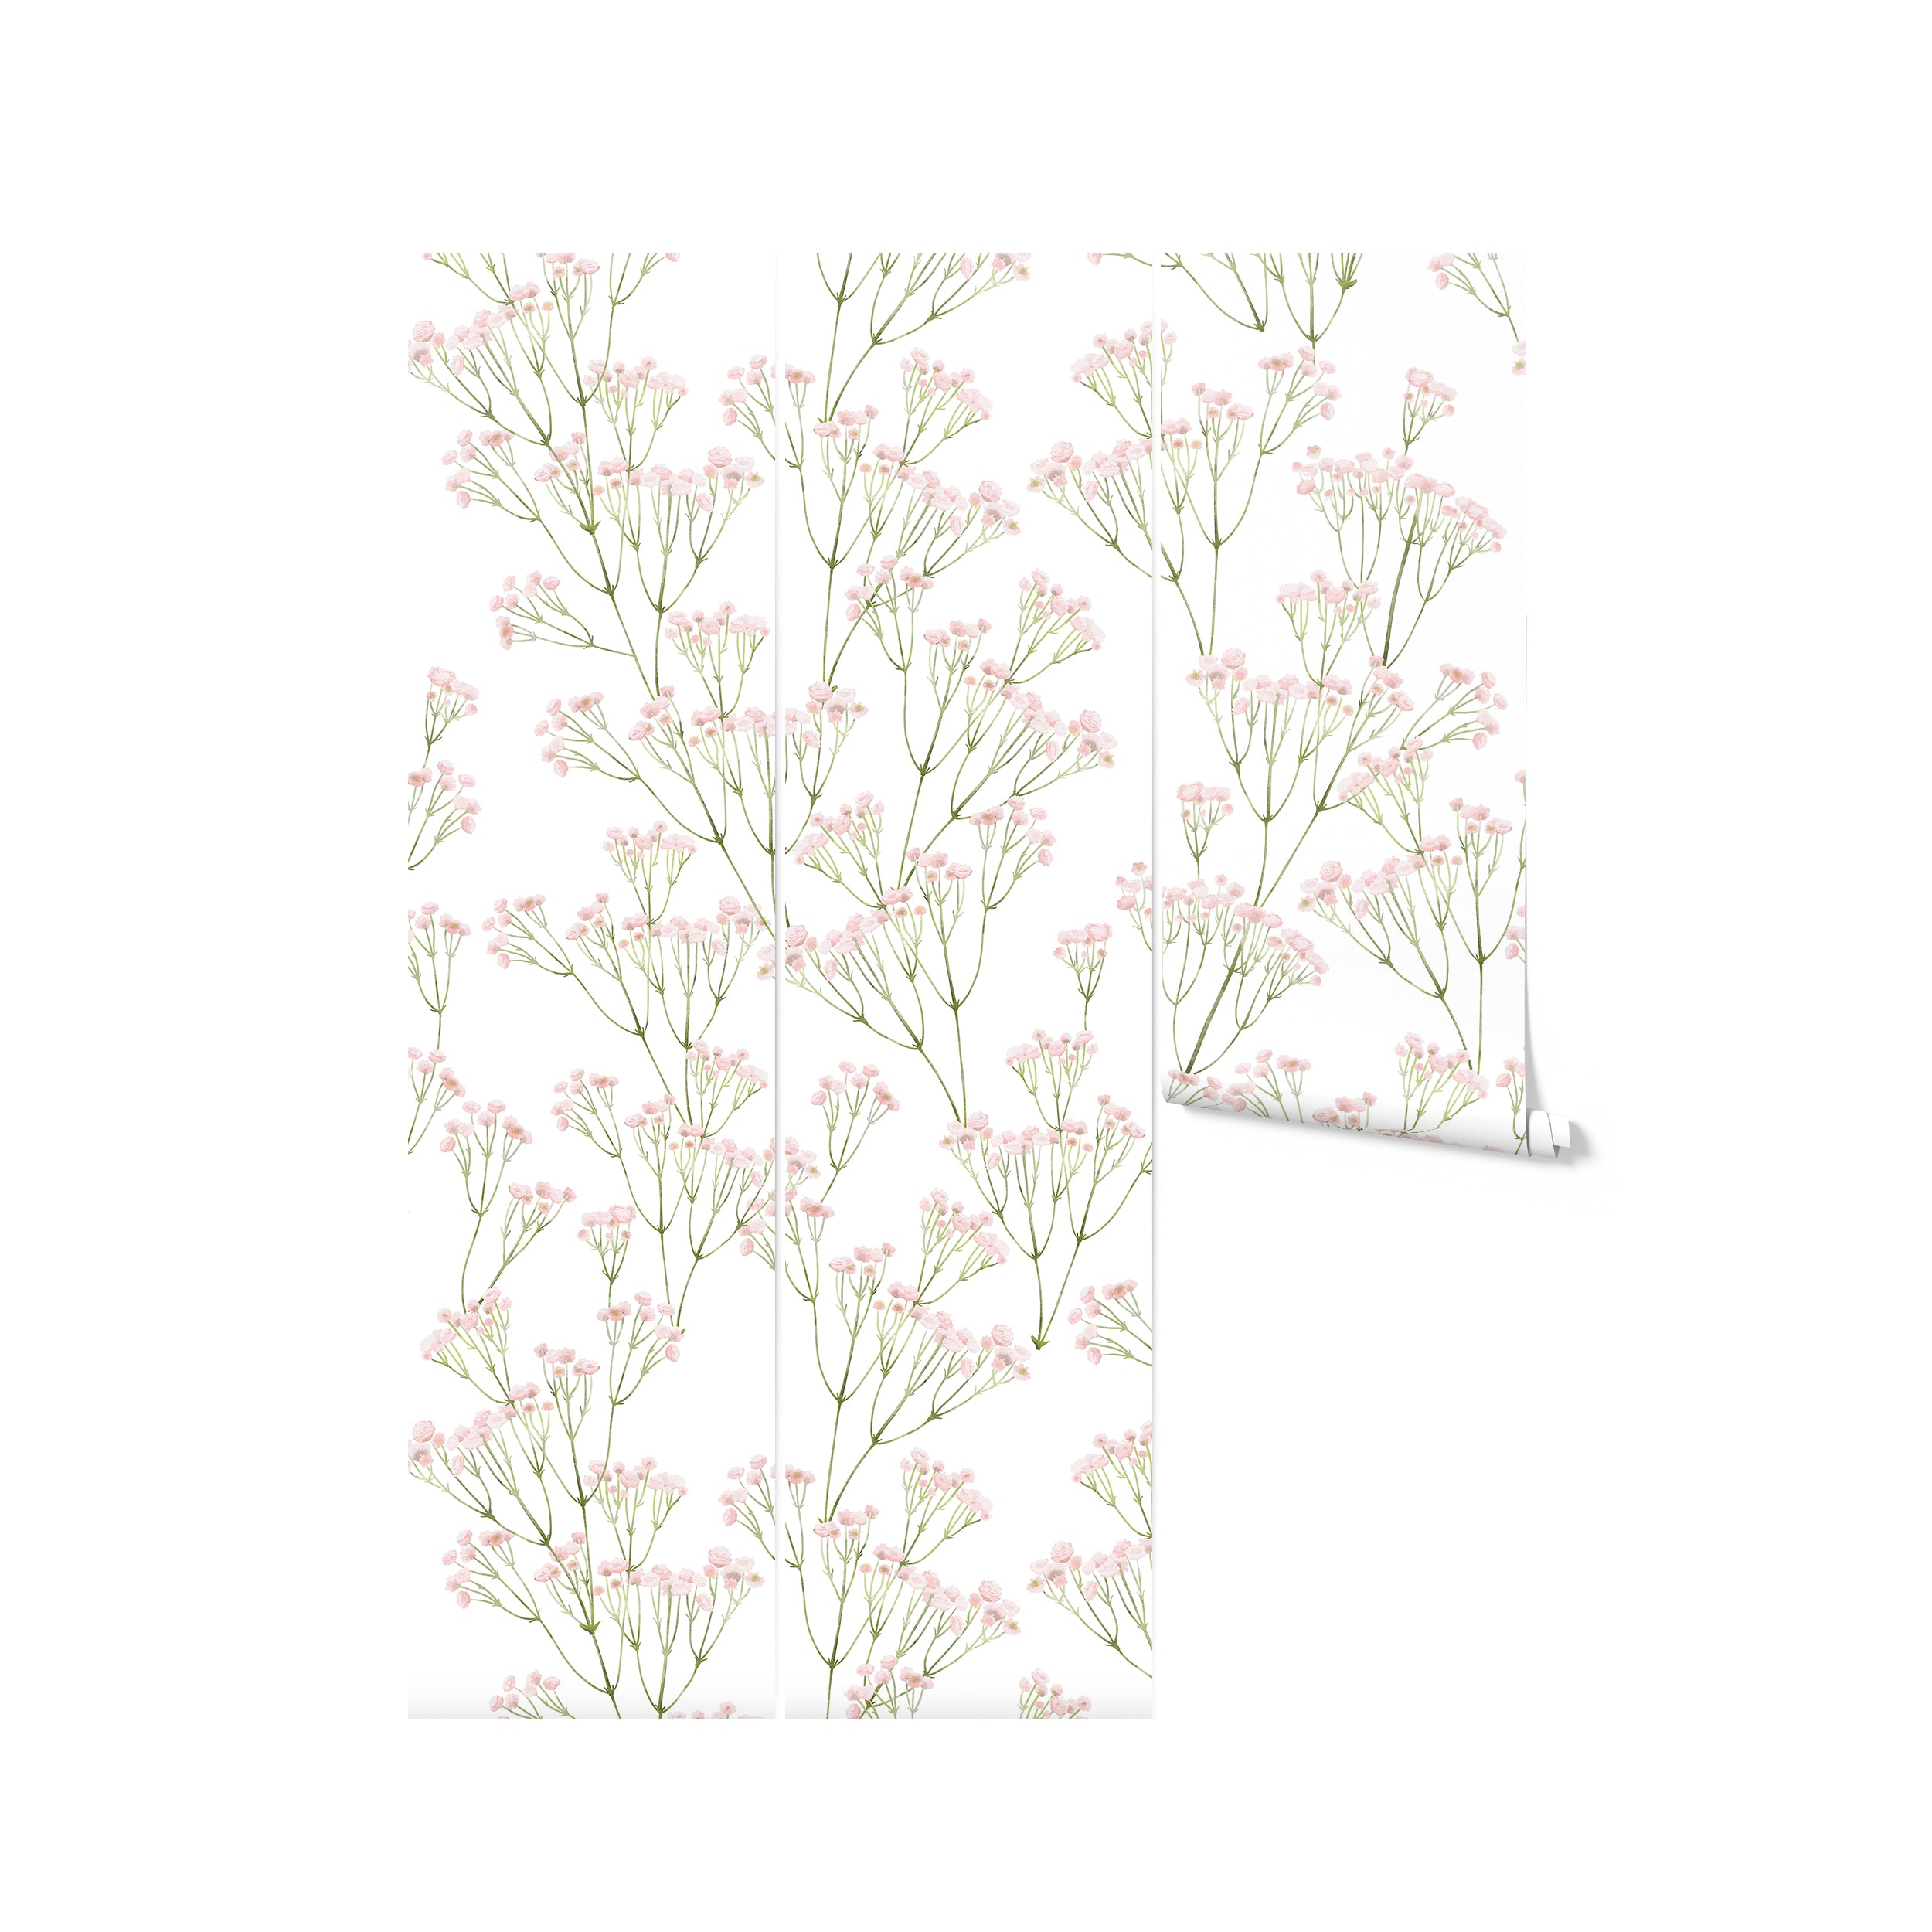 A roll of Le Marchand de Fleurs Wallpaper - 75", showcasing the wallpaper's gentle floral design with clusters of pale pink flowers and vibrant green stems, perfect for adding a touch of nature’s softness to any room.